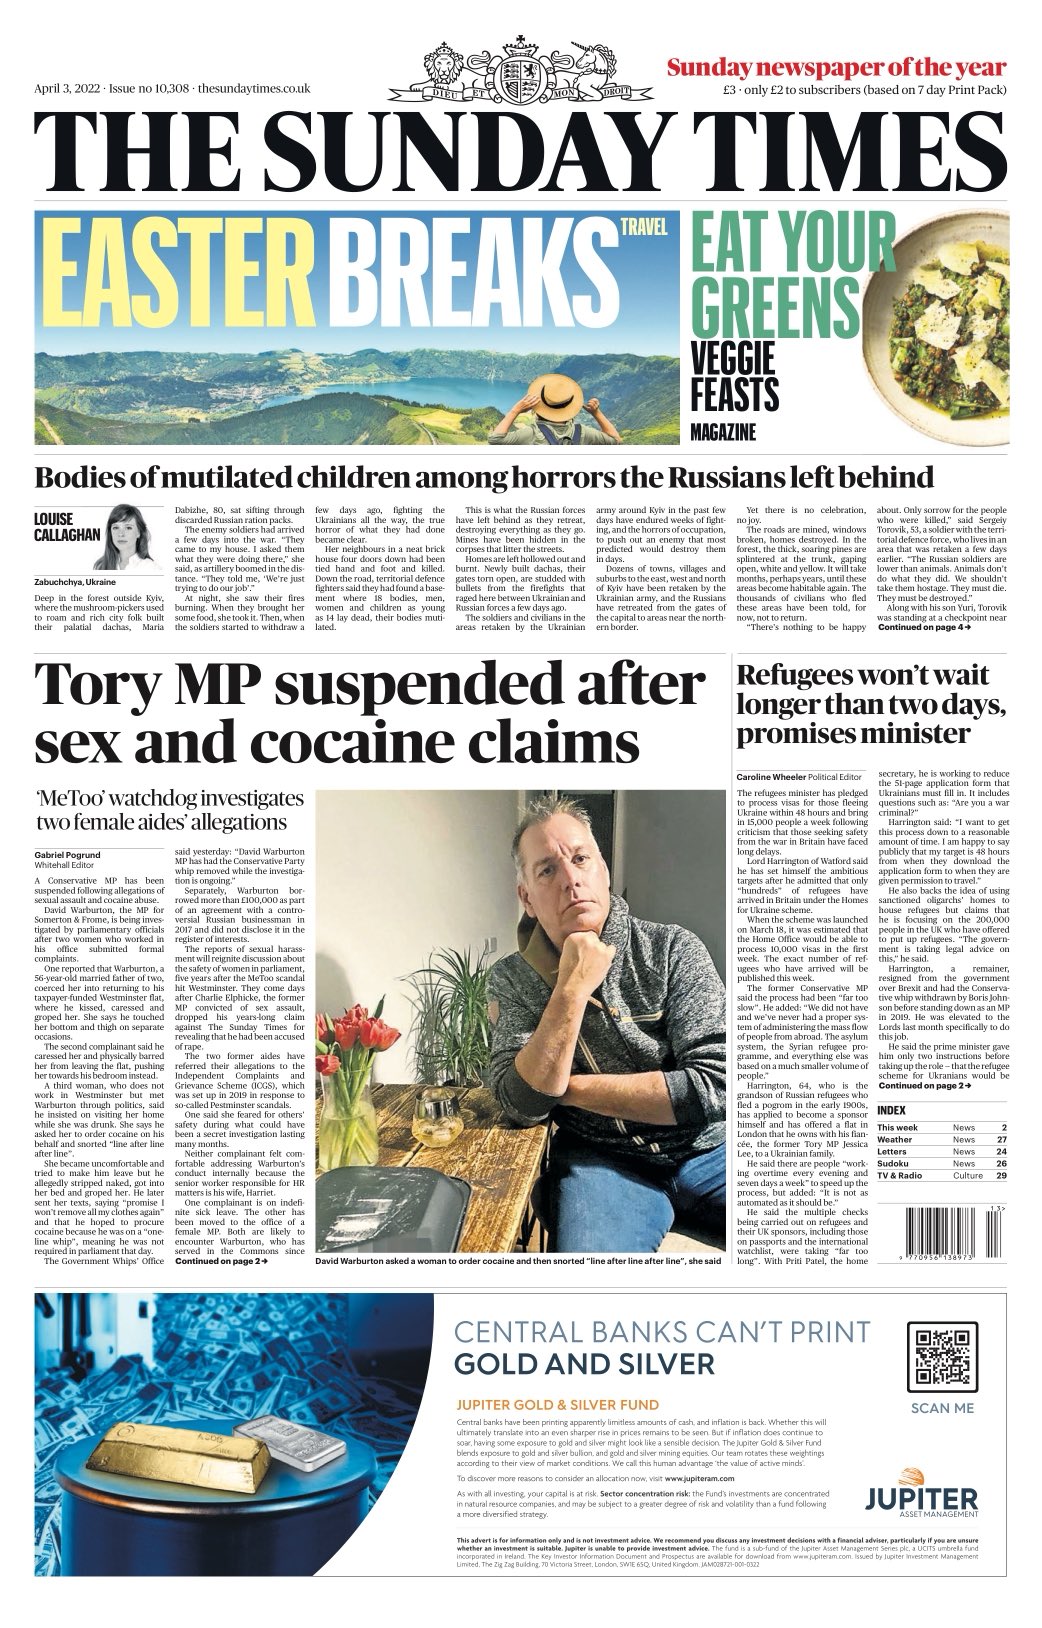 The Sunday Times published allegations in April last year